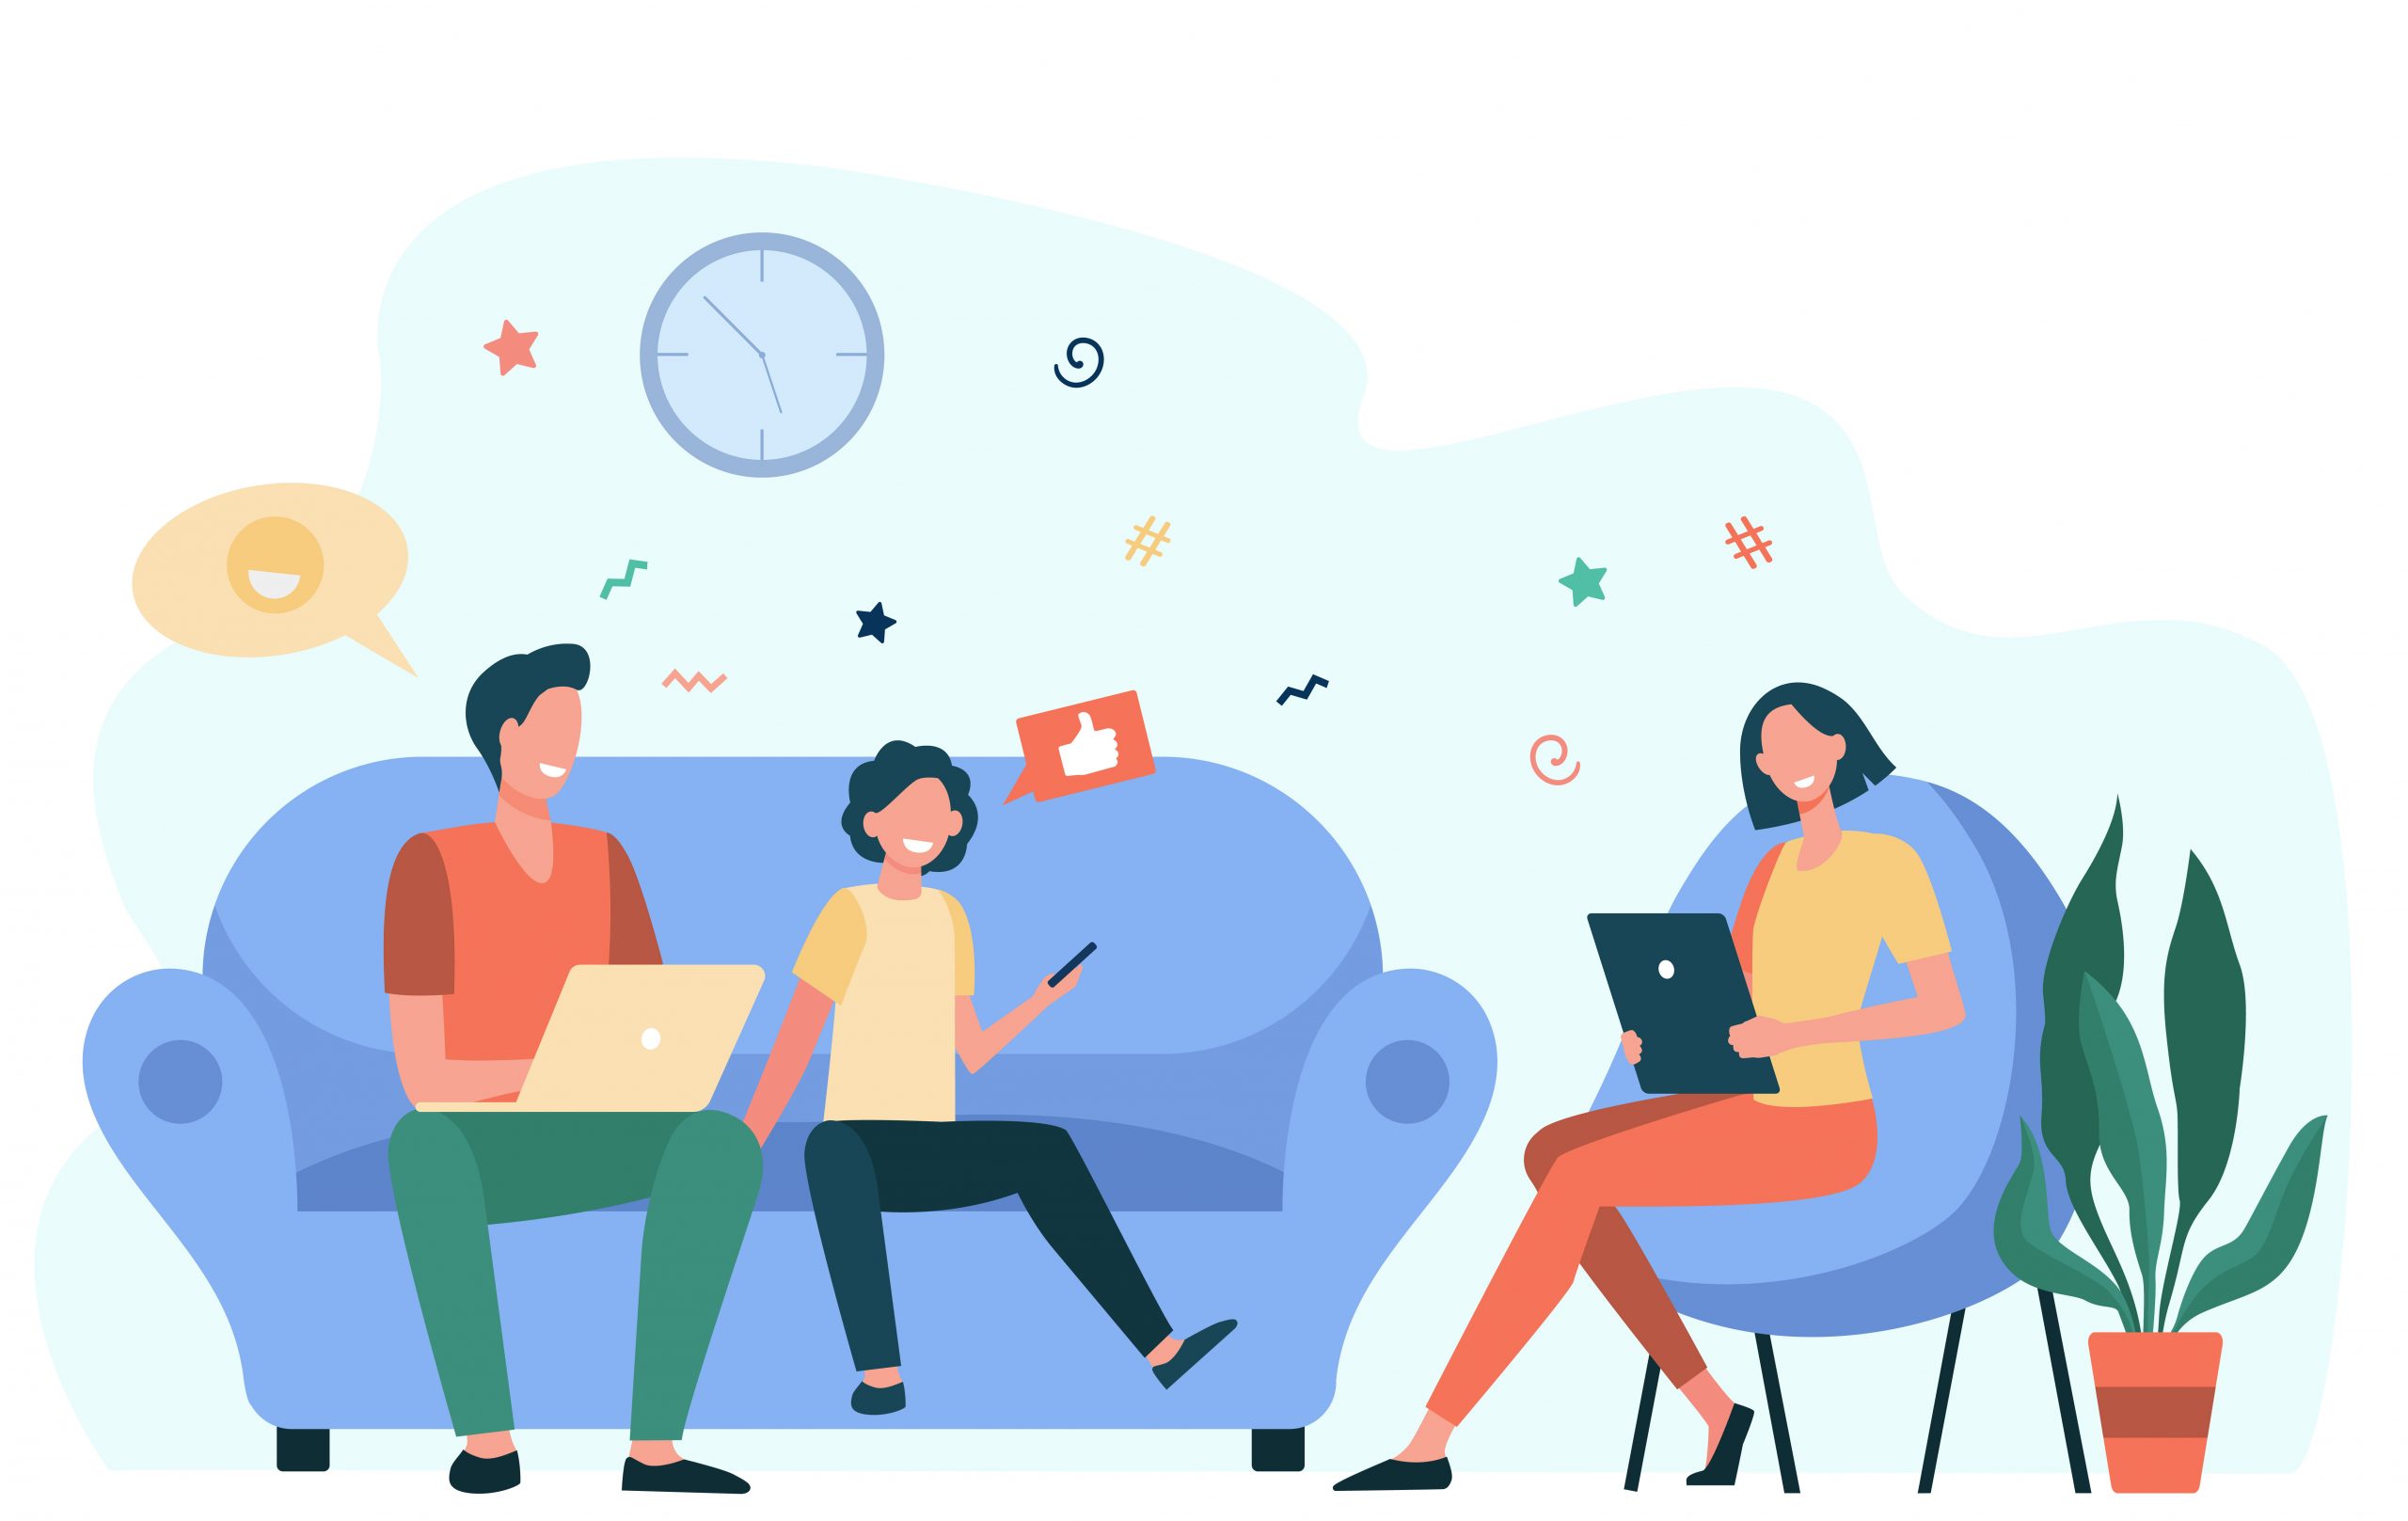 Parents couple and kid using gadgets. Social media addicted family with laptop, tablet and phone sitting together. Flat vector illustration for internet addiction, communication concept